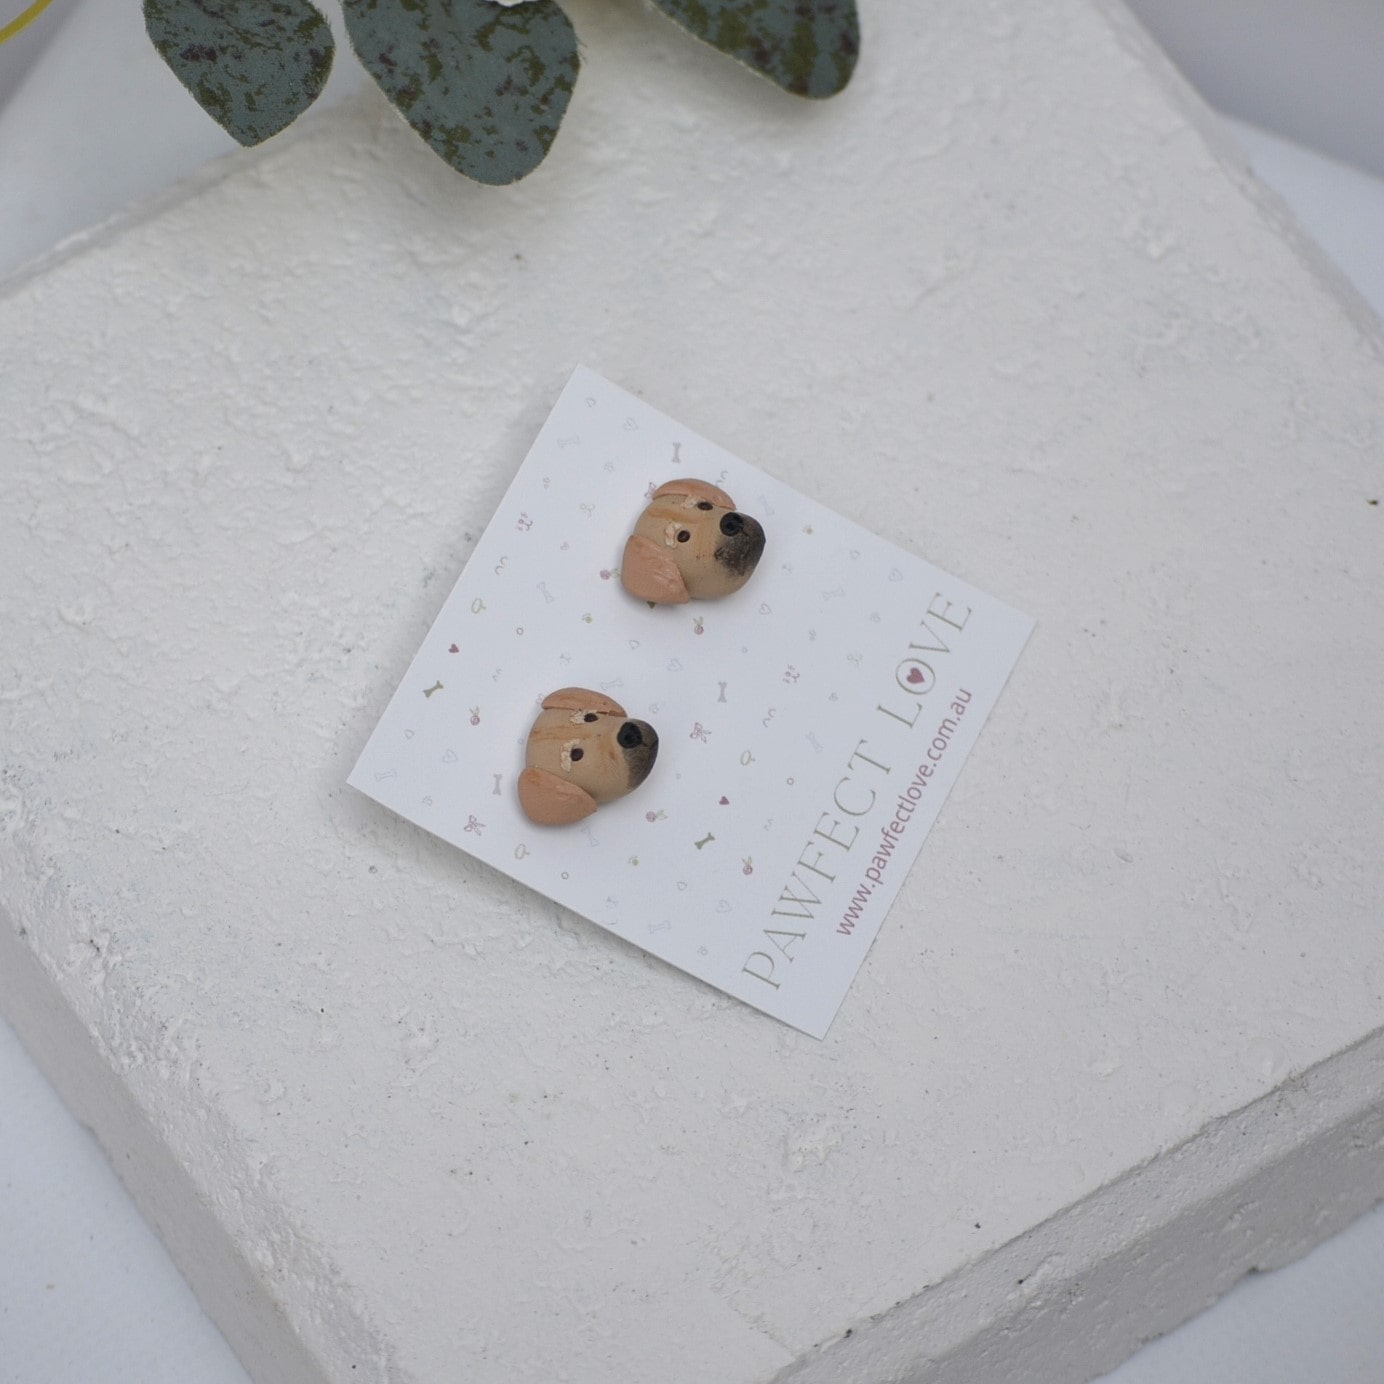 Handmade golden retriever stud earrings by Pawfect Love, positioned in front of white paver